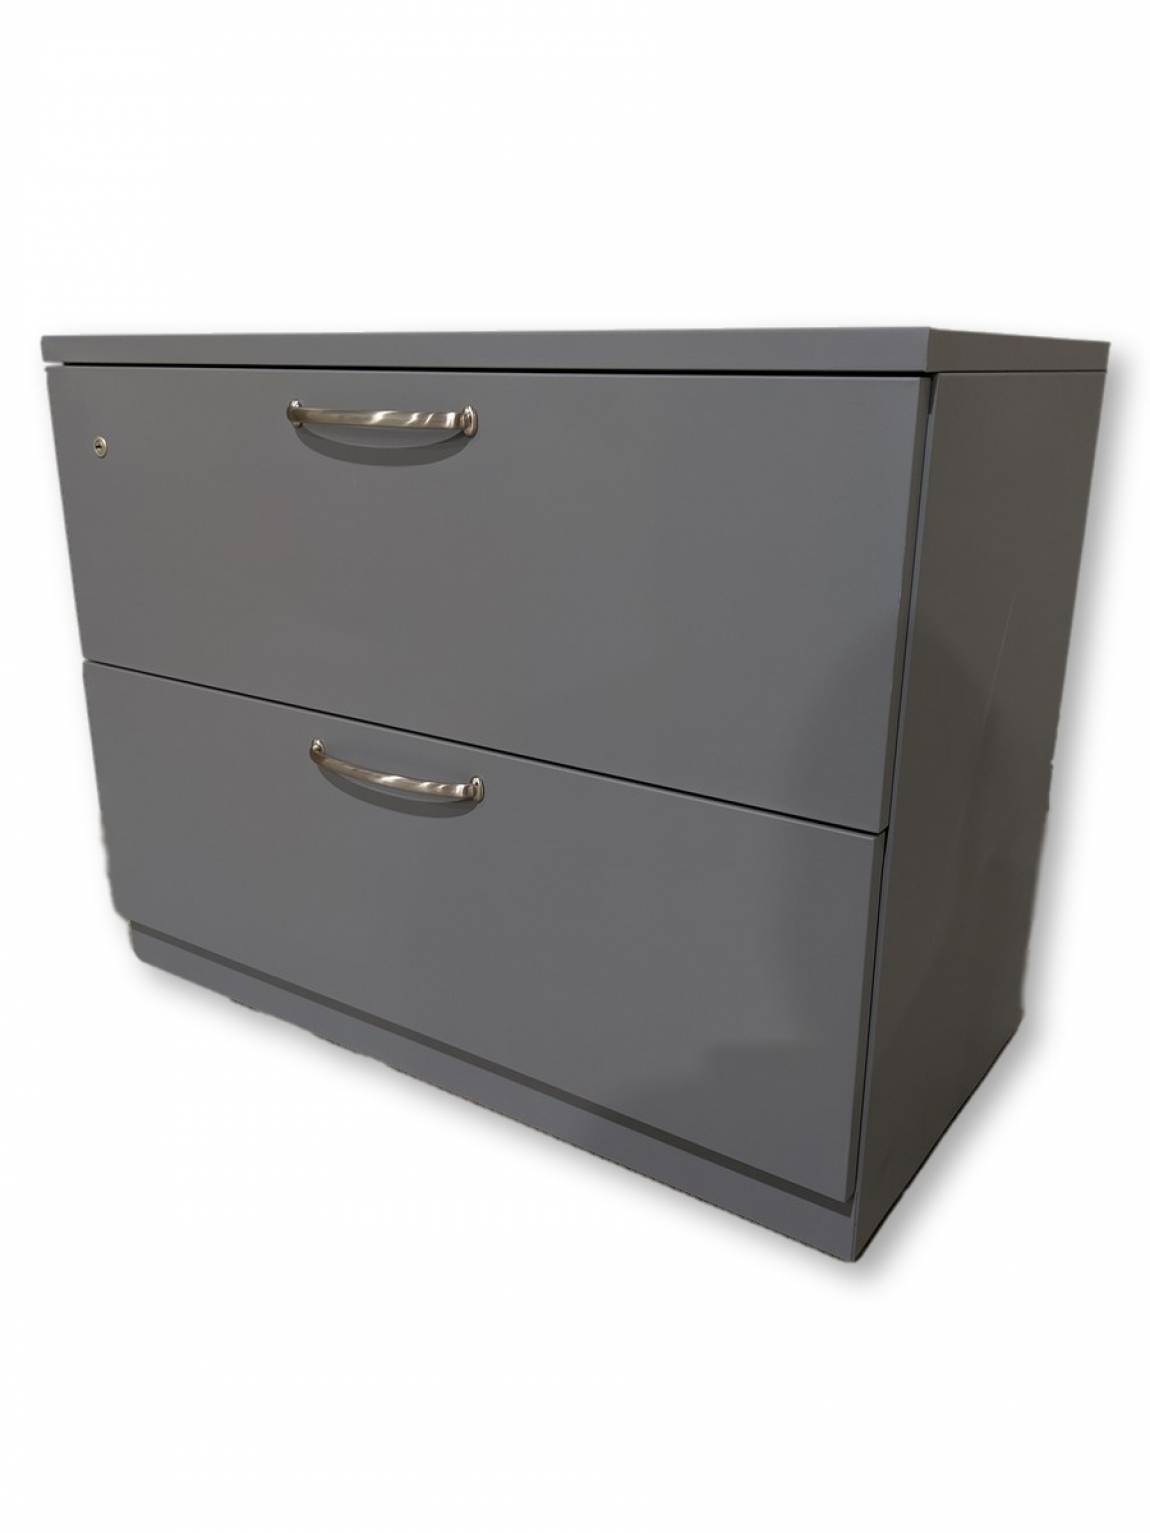 Steelcase Gray 2 Drawer Lateral Filing Cabinet - 35.75 Inch Wide